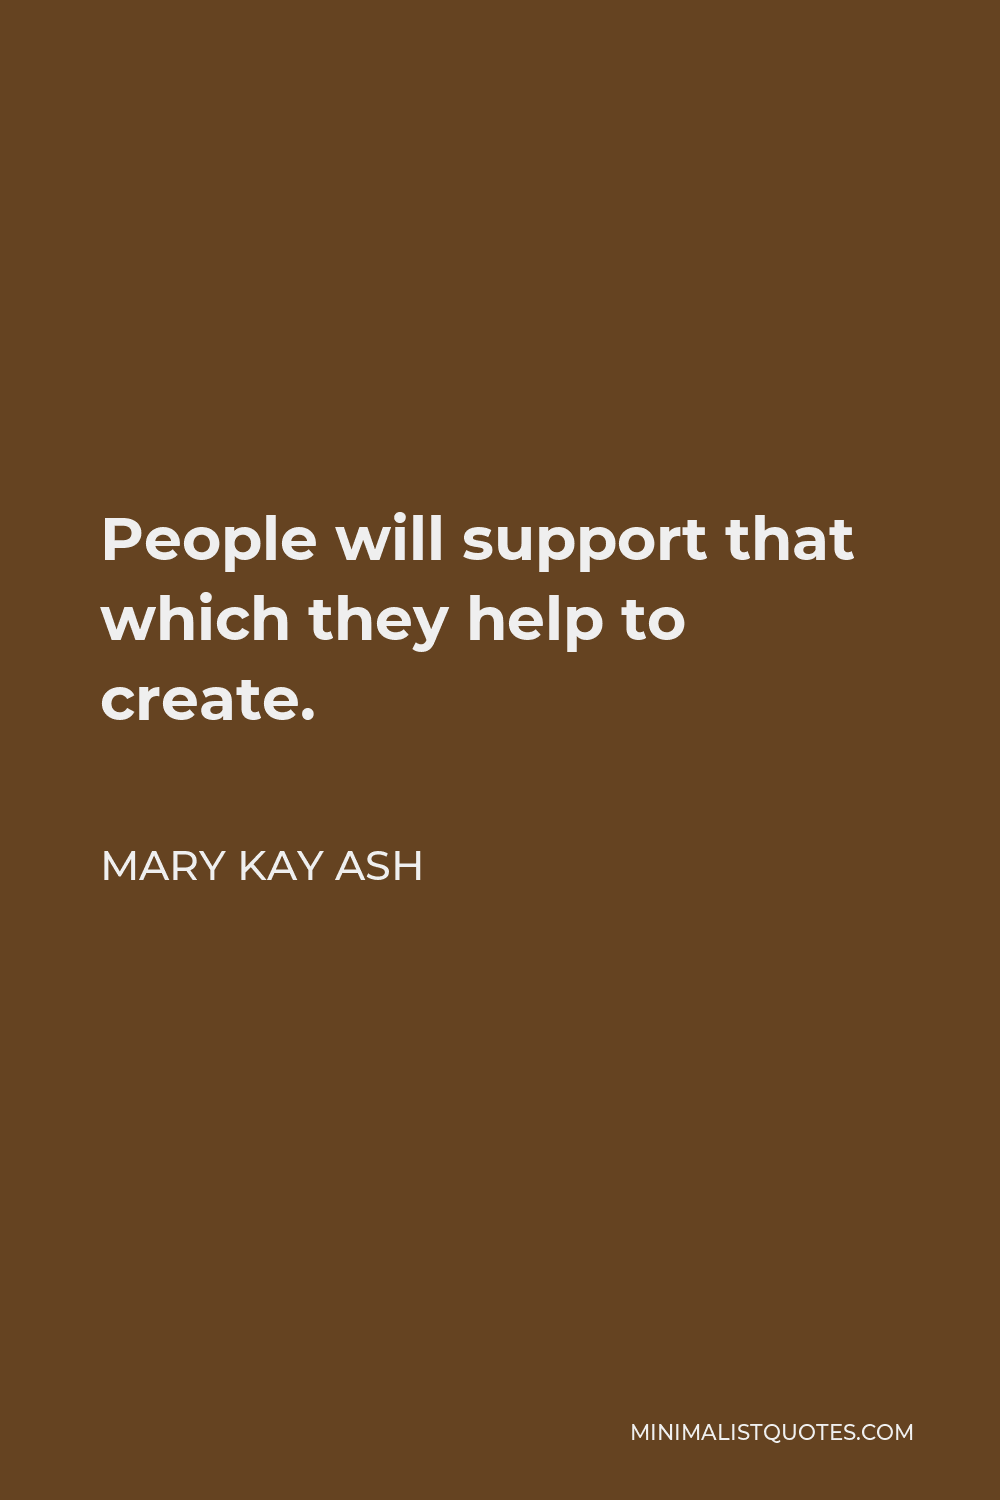 Mary Kay Ash Quote - People will support that which they help to create.